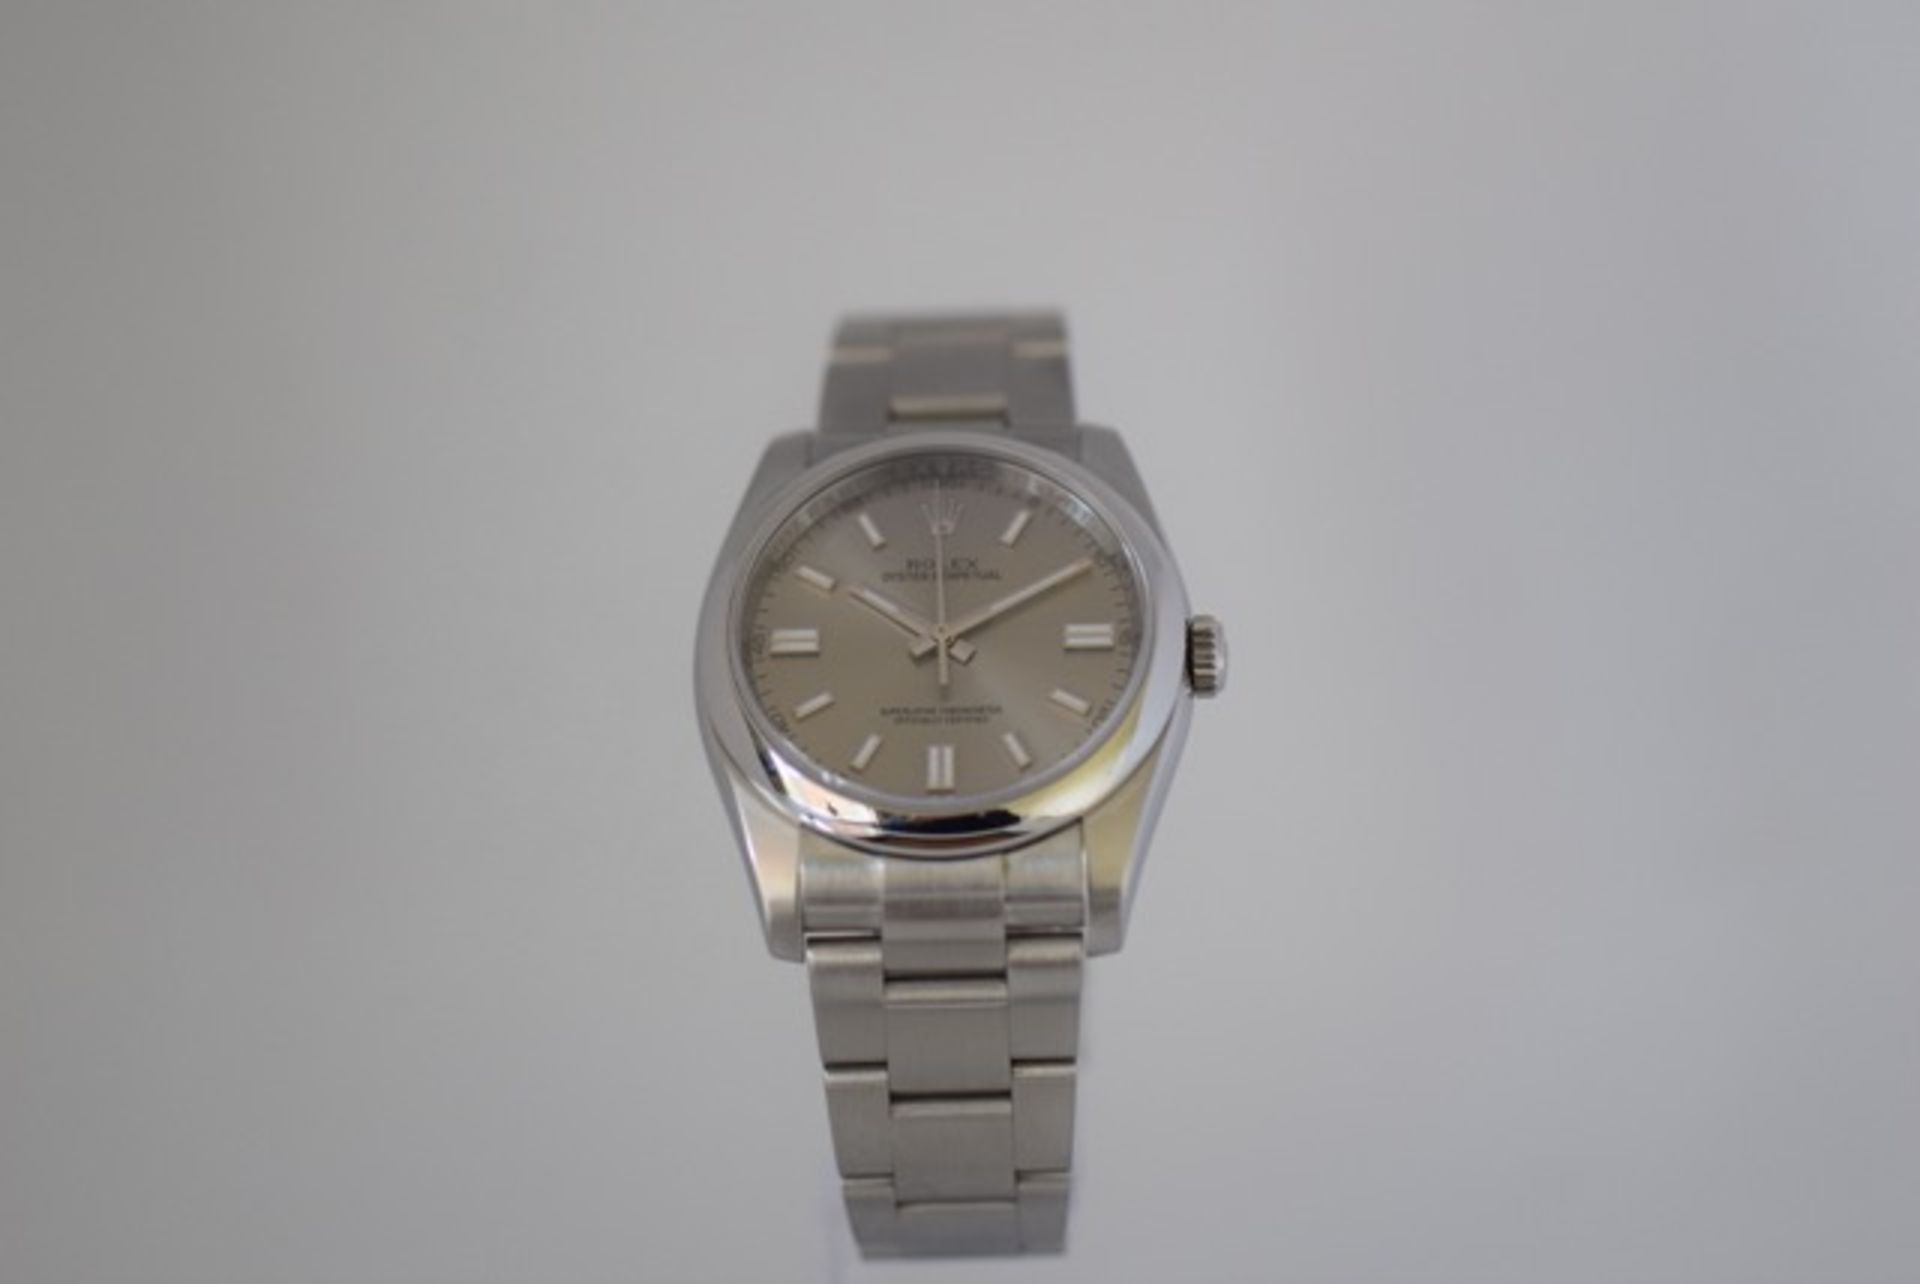 ROLEX OYSTER 116000 WATCH - Image 7 of 8